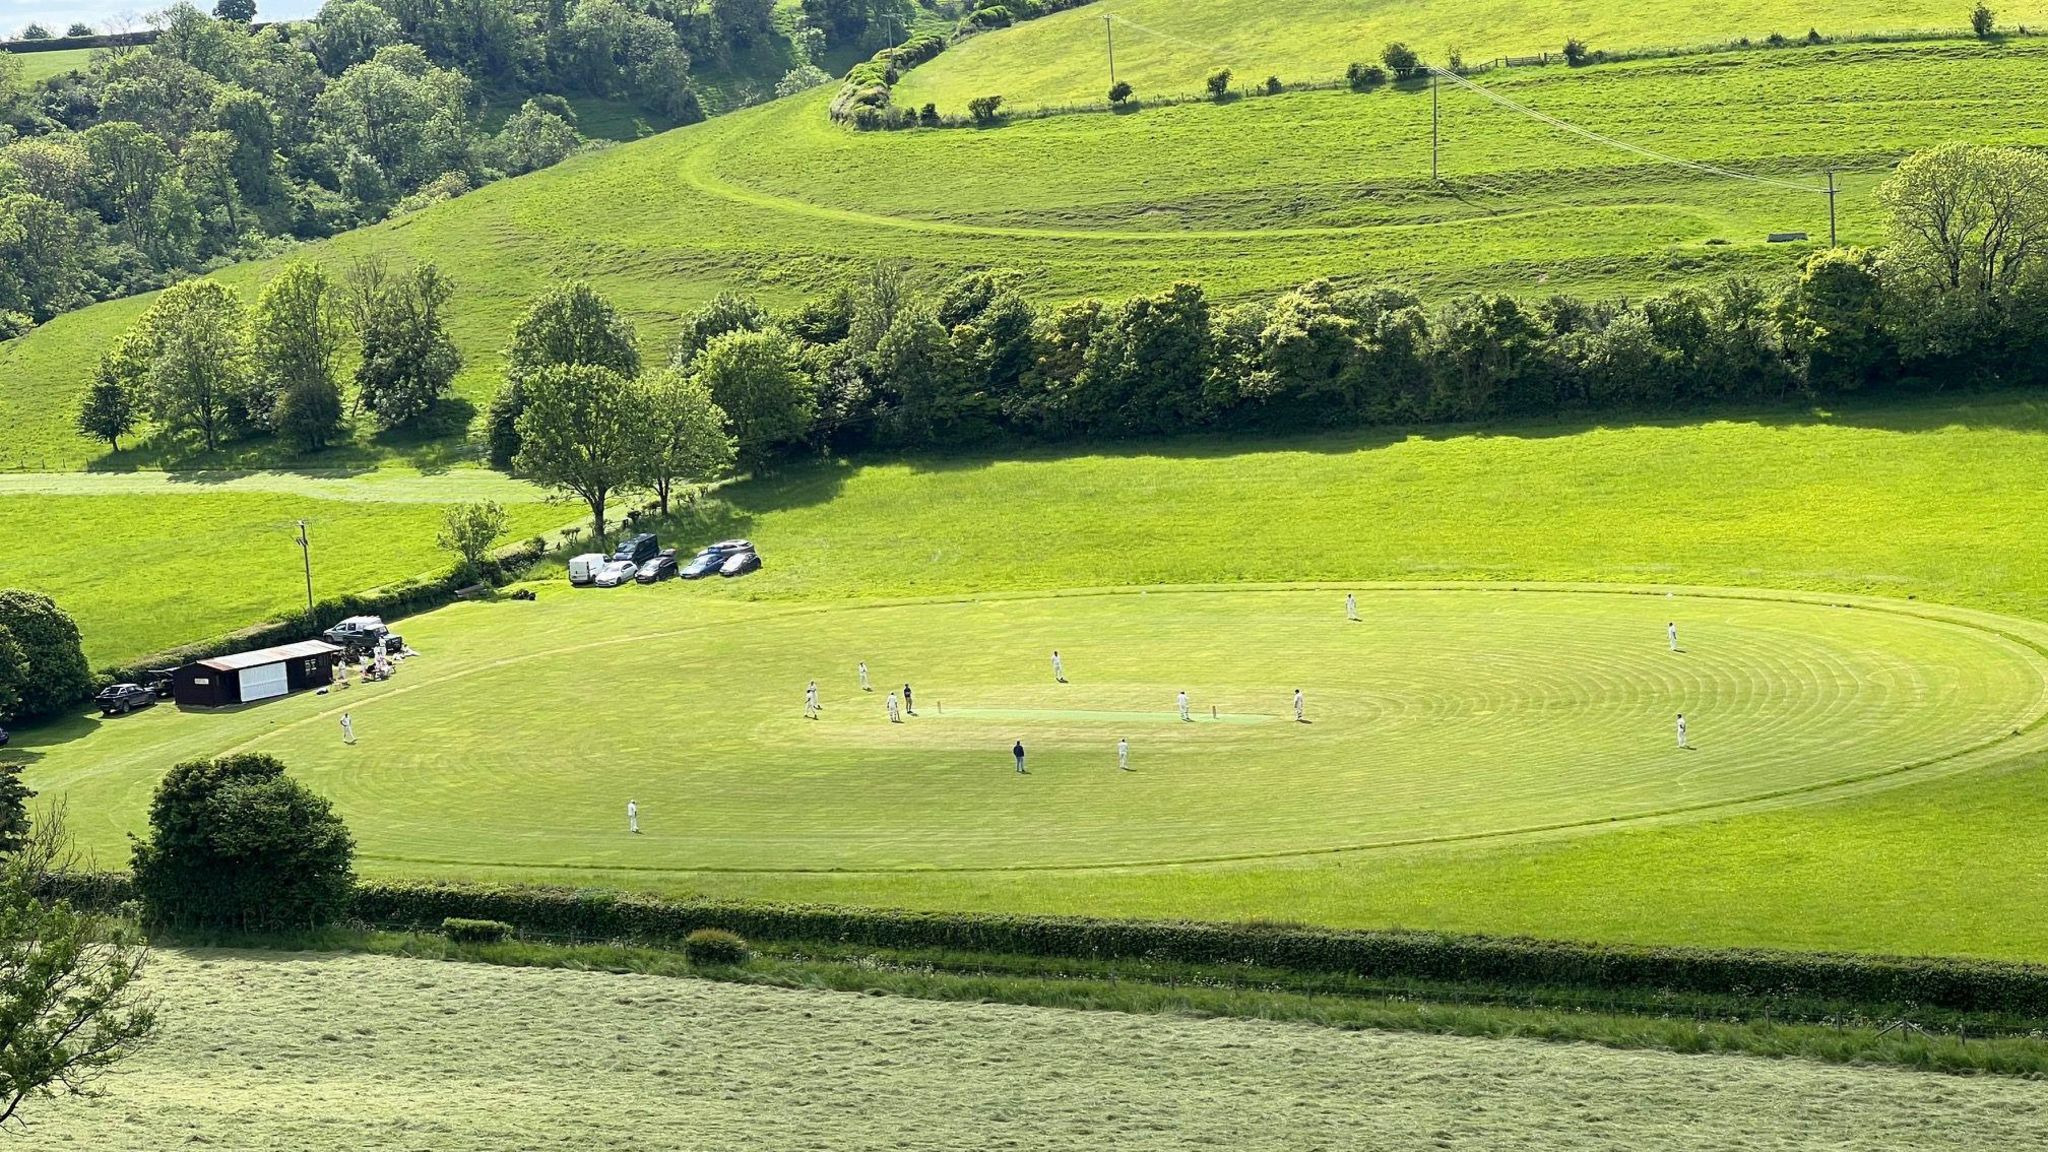 An elevated view of a cricket field set in a rural landscape of trees and fields